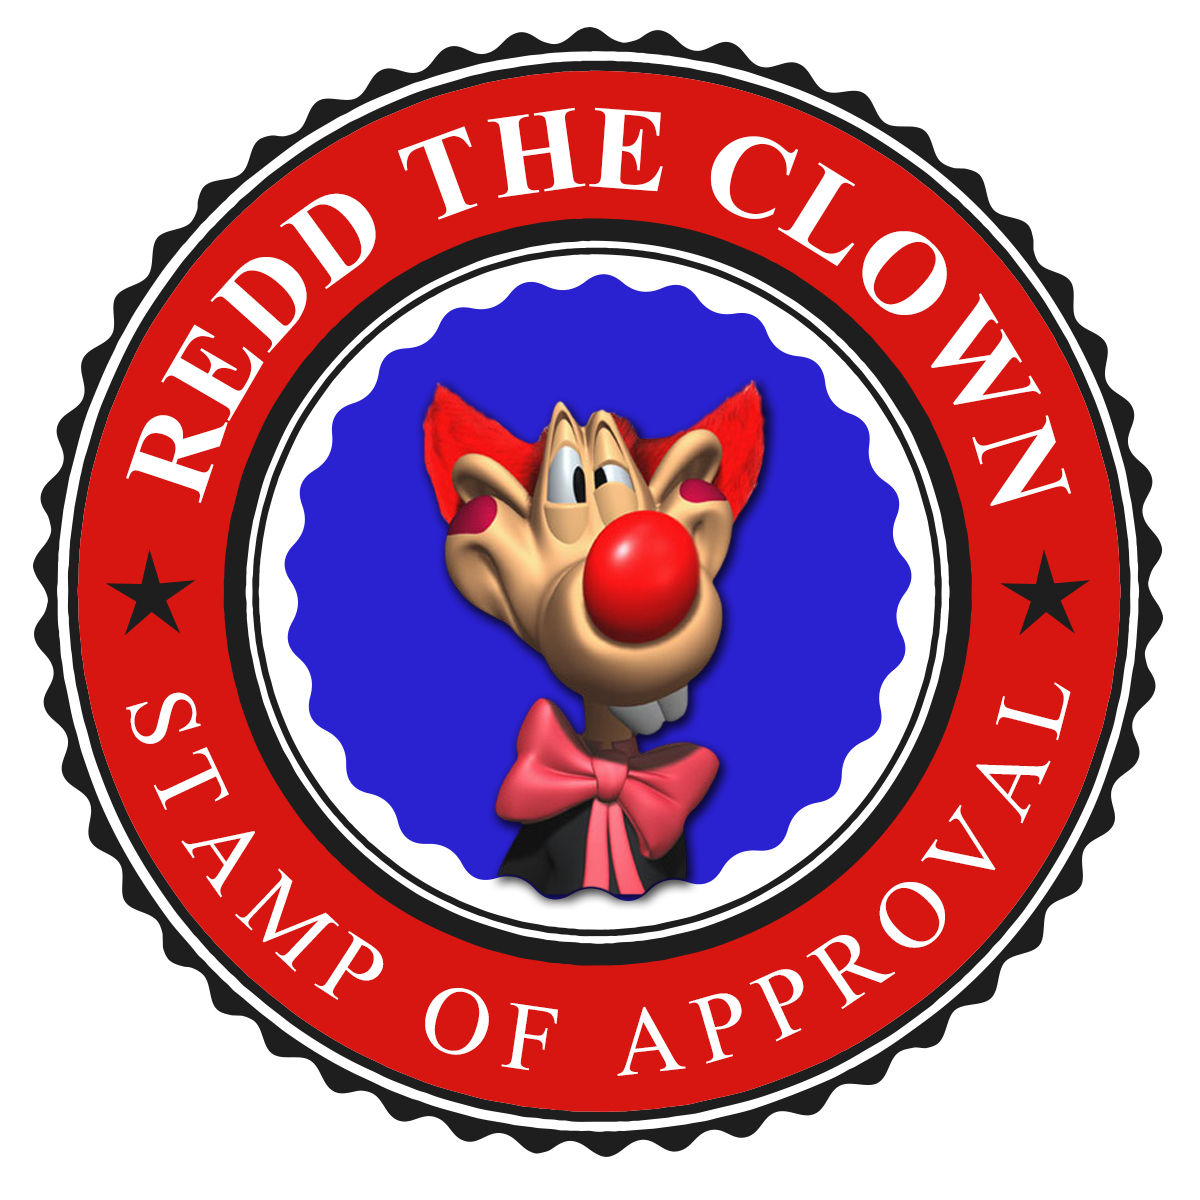 Thinking Animation Blog: Eleven Rig - REDD THE CLOWN STAMP OF APPROVAL